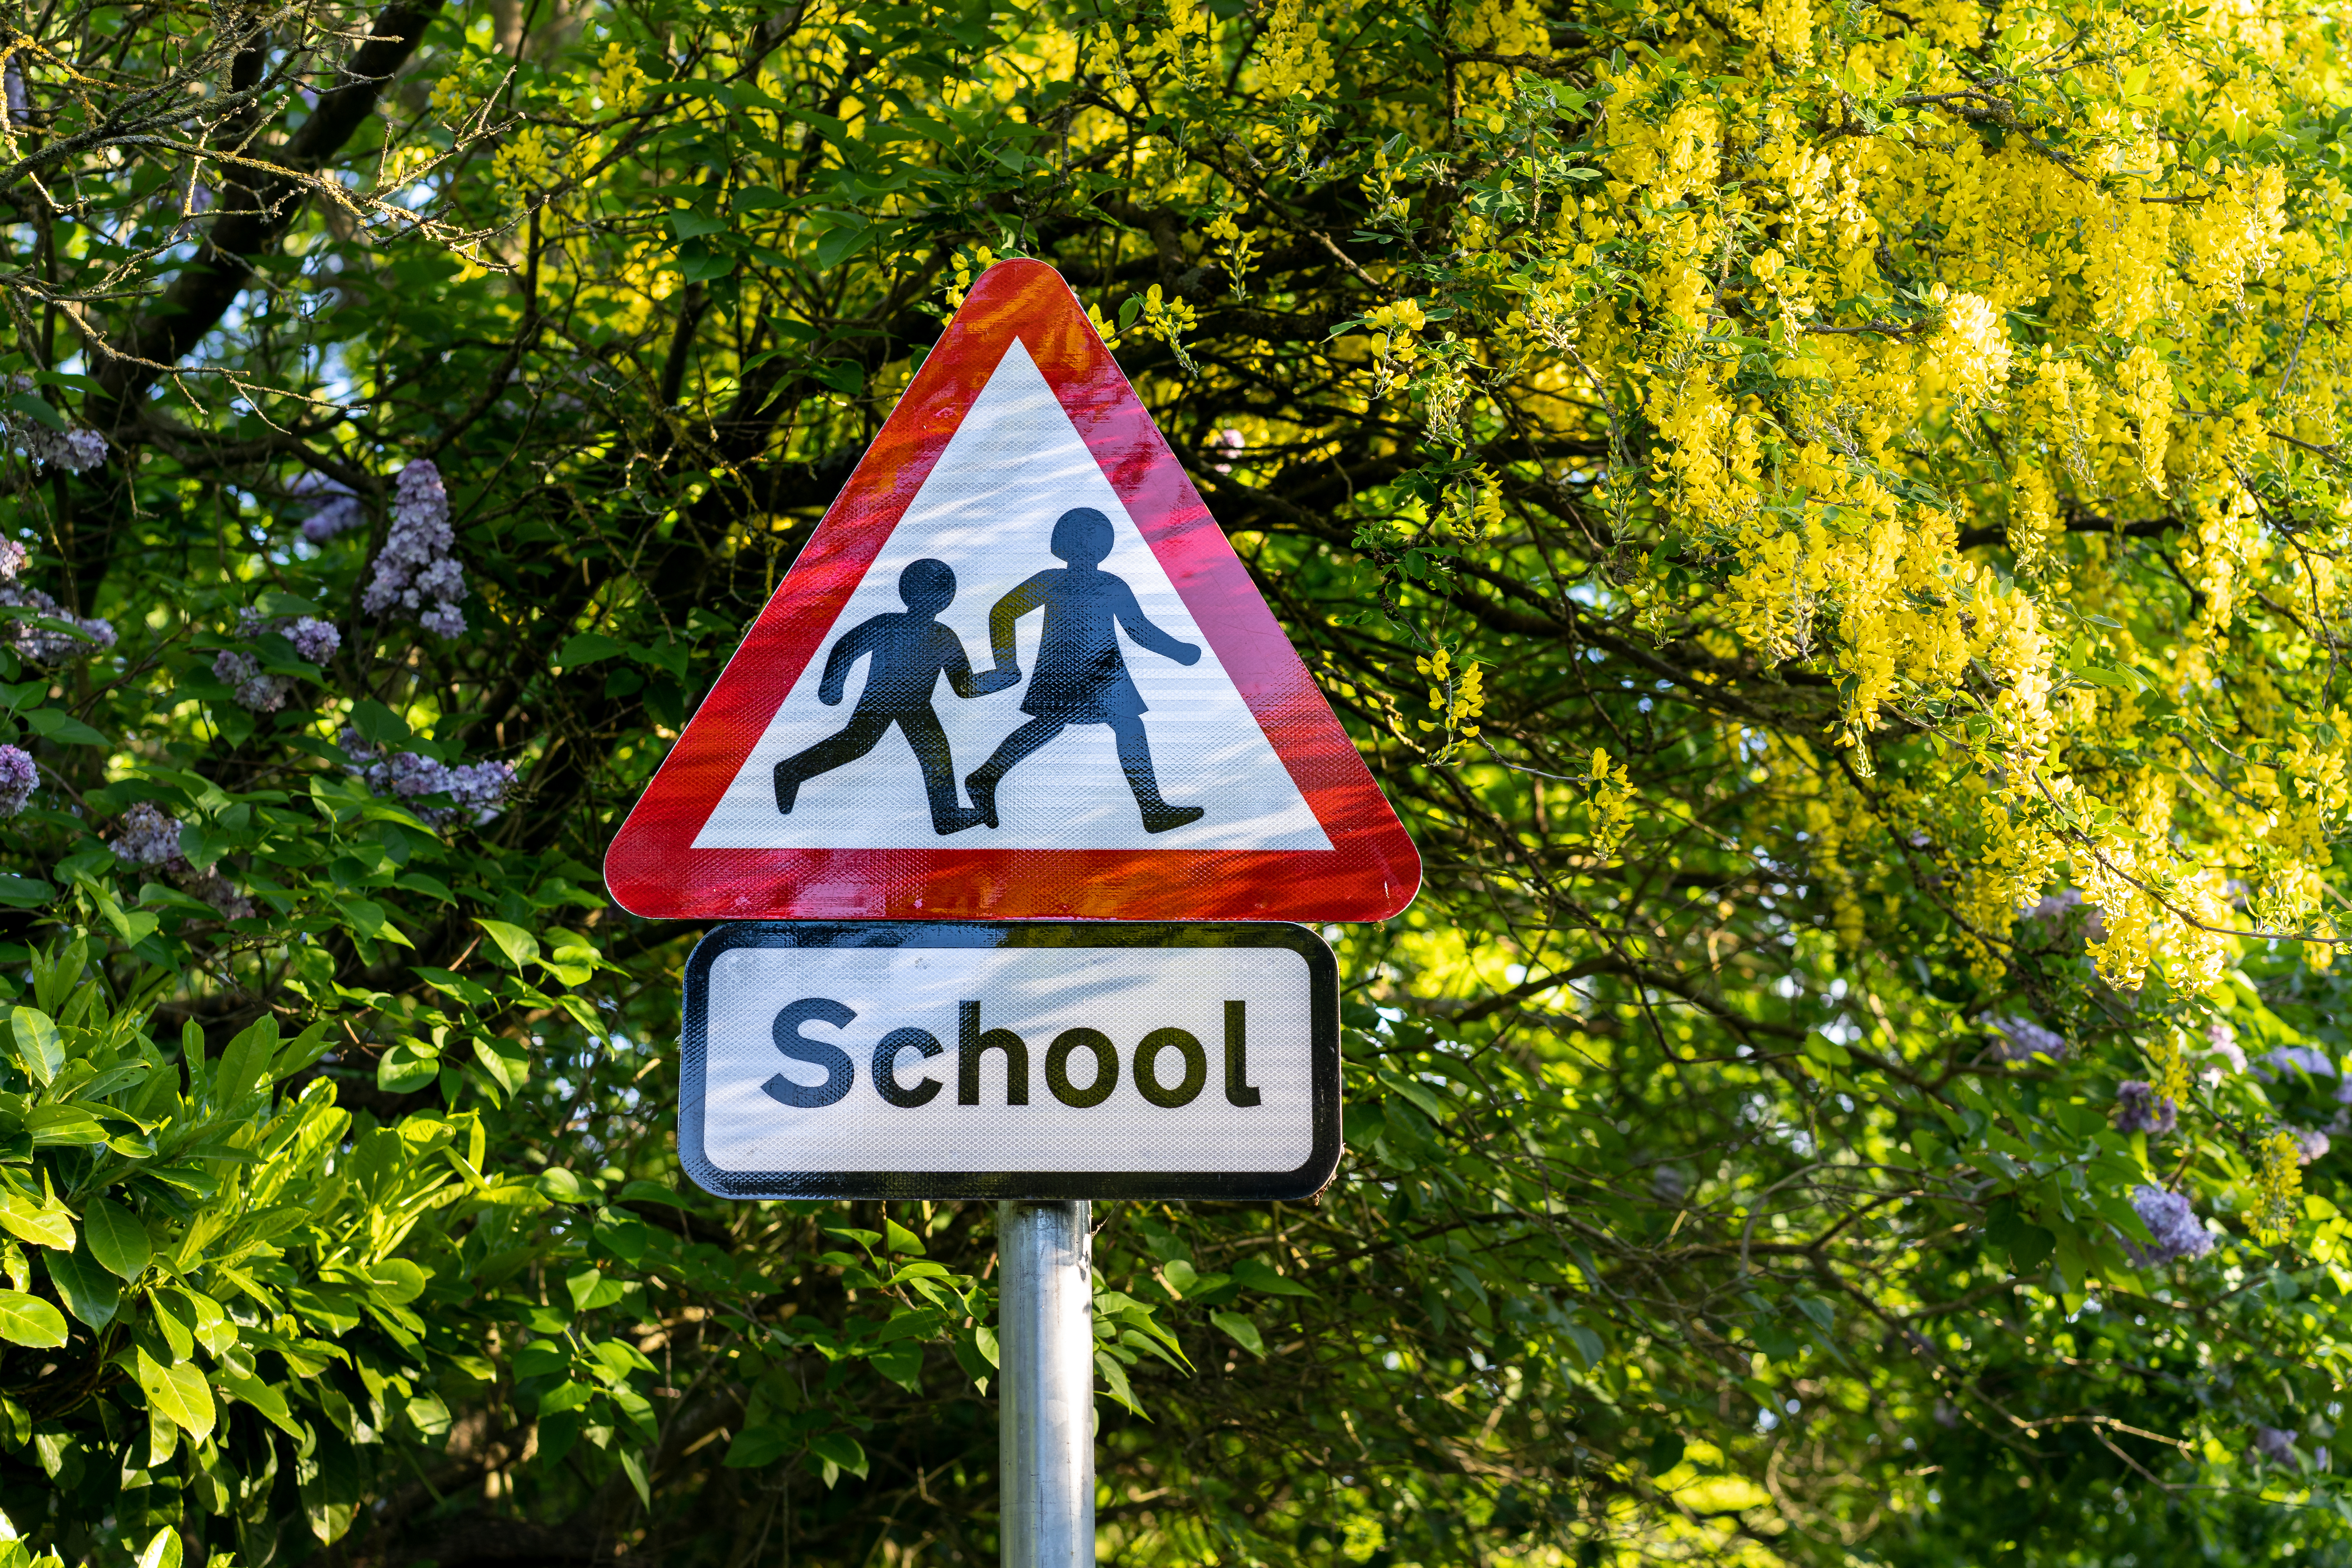 School sign in front of trees